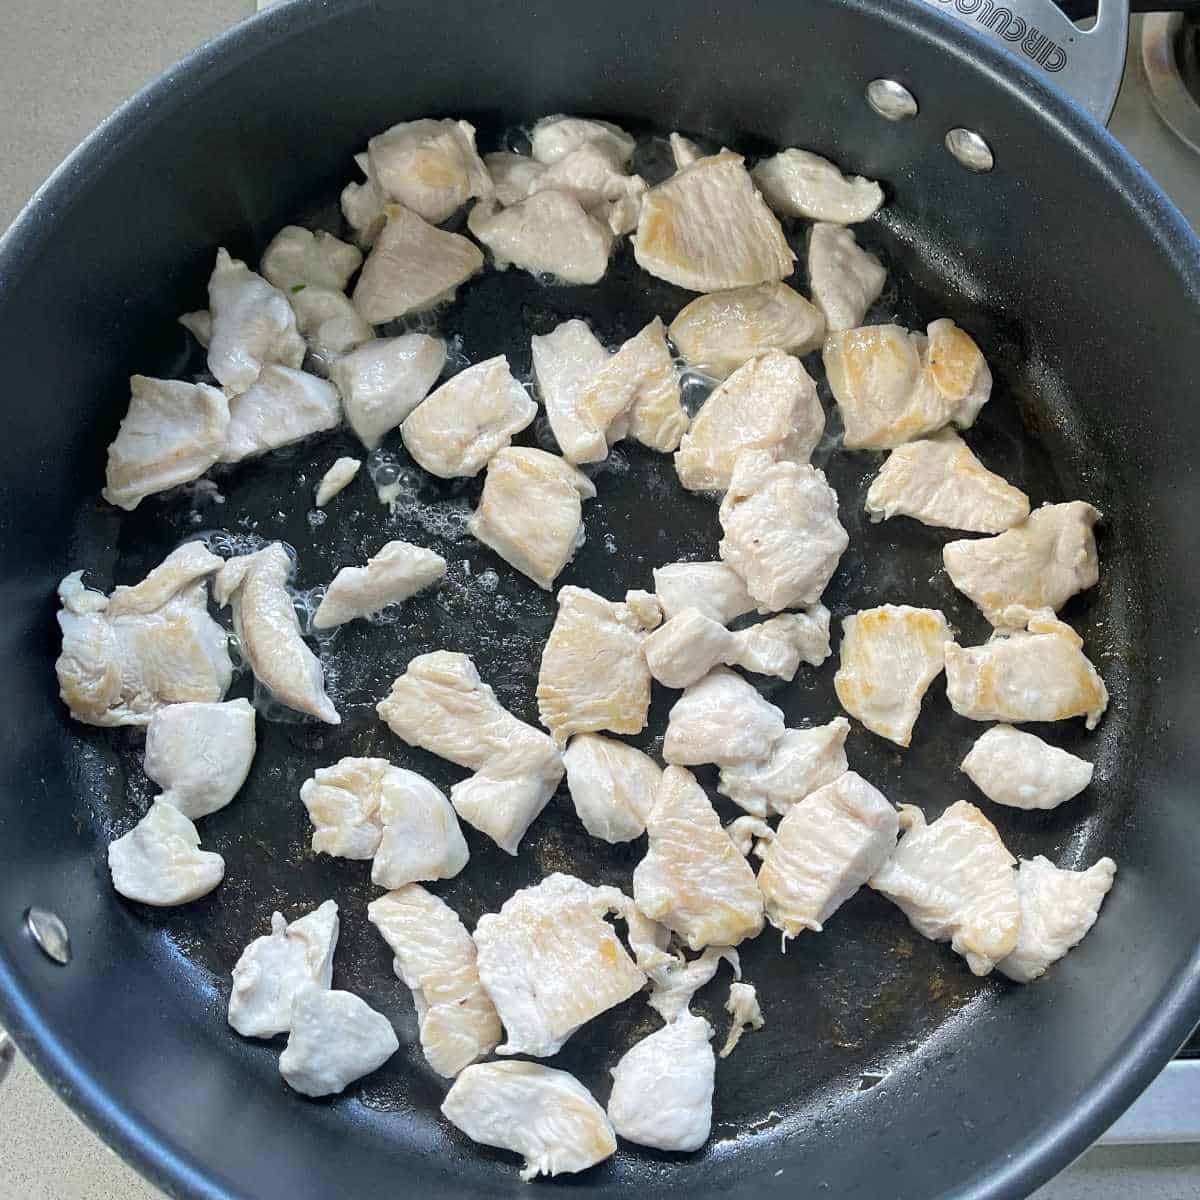 Cubed chicken breast frying in a frypan